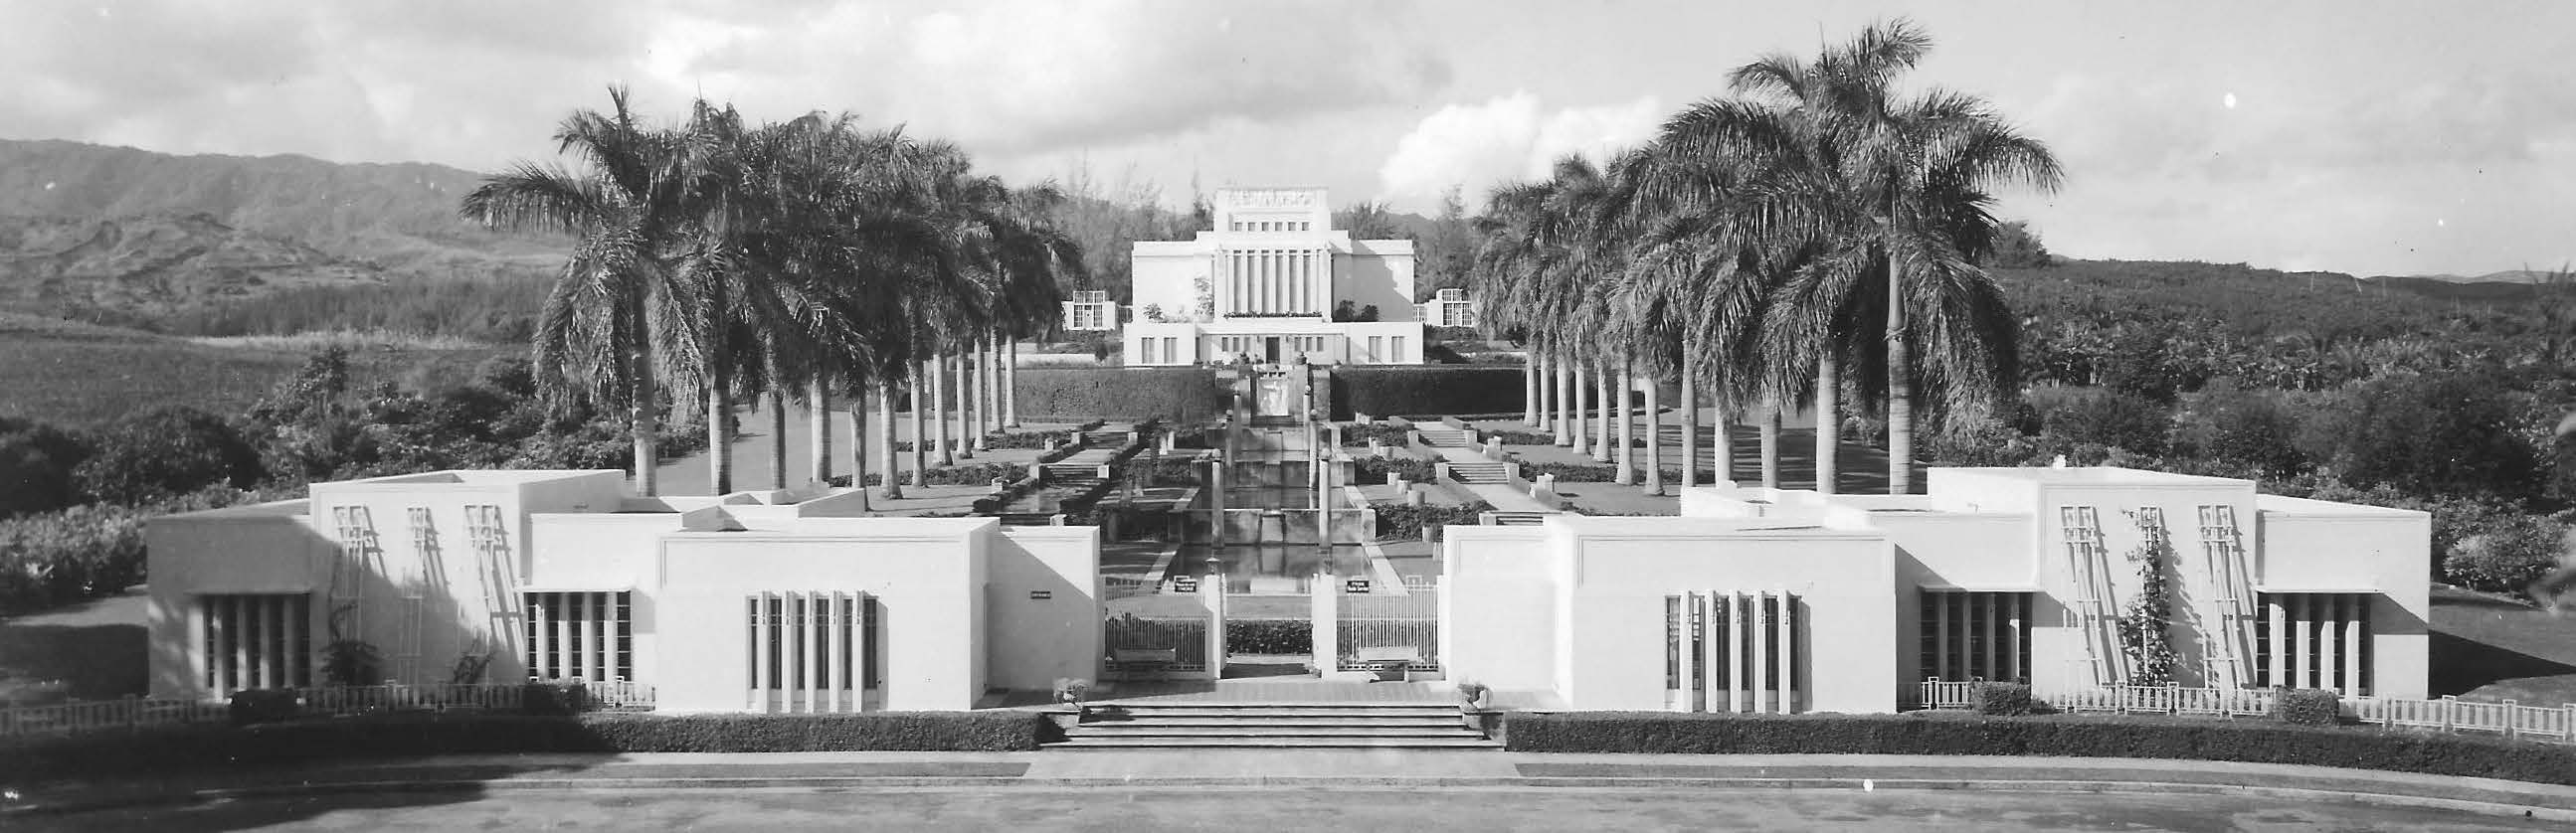 Success of the Bureau of Information (visitors’ center) warranted an enlarged facility, and in 1938 it was more than tripled in size. Photo of bureau and temple courtesy of Mark James.